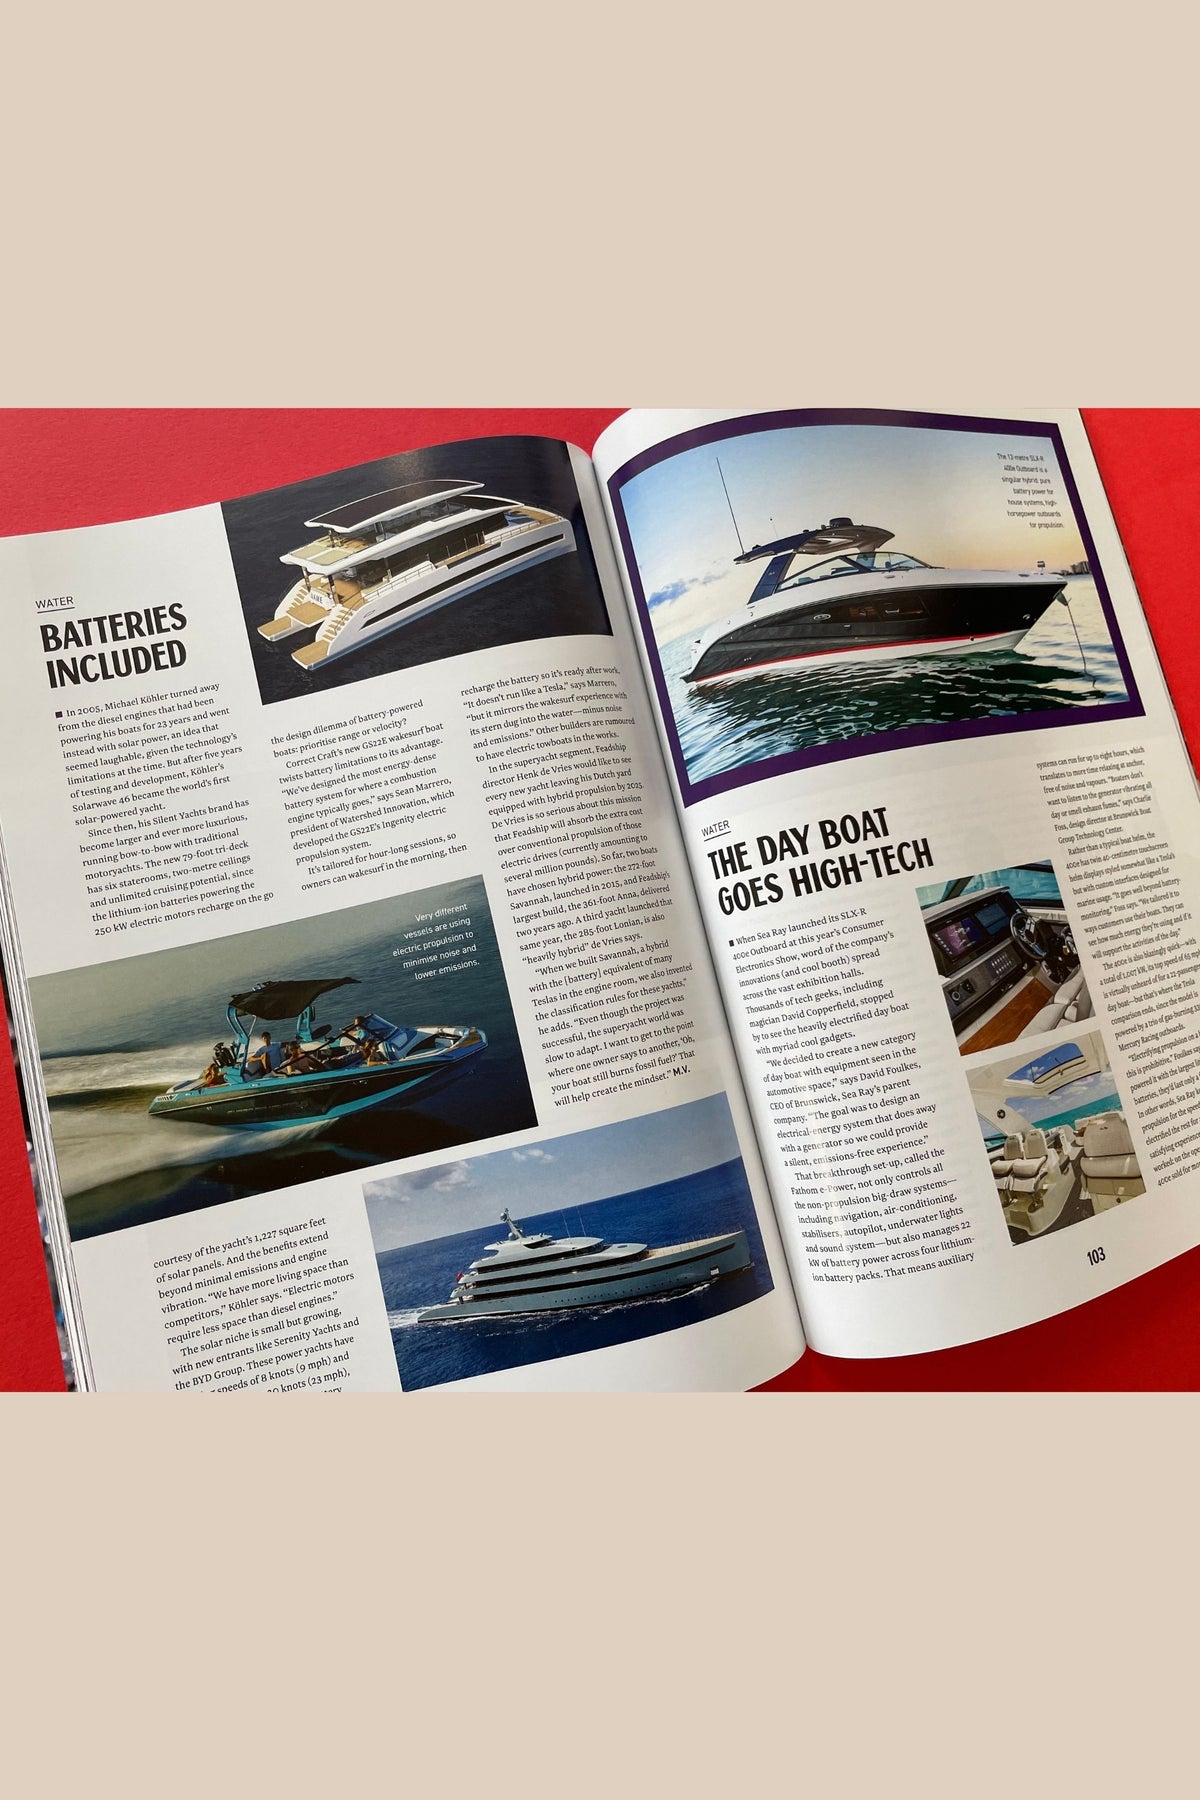 Robb Report UK The Future Issue Spring 2021